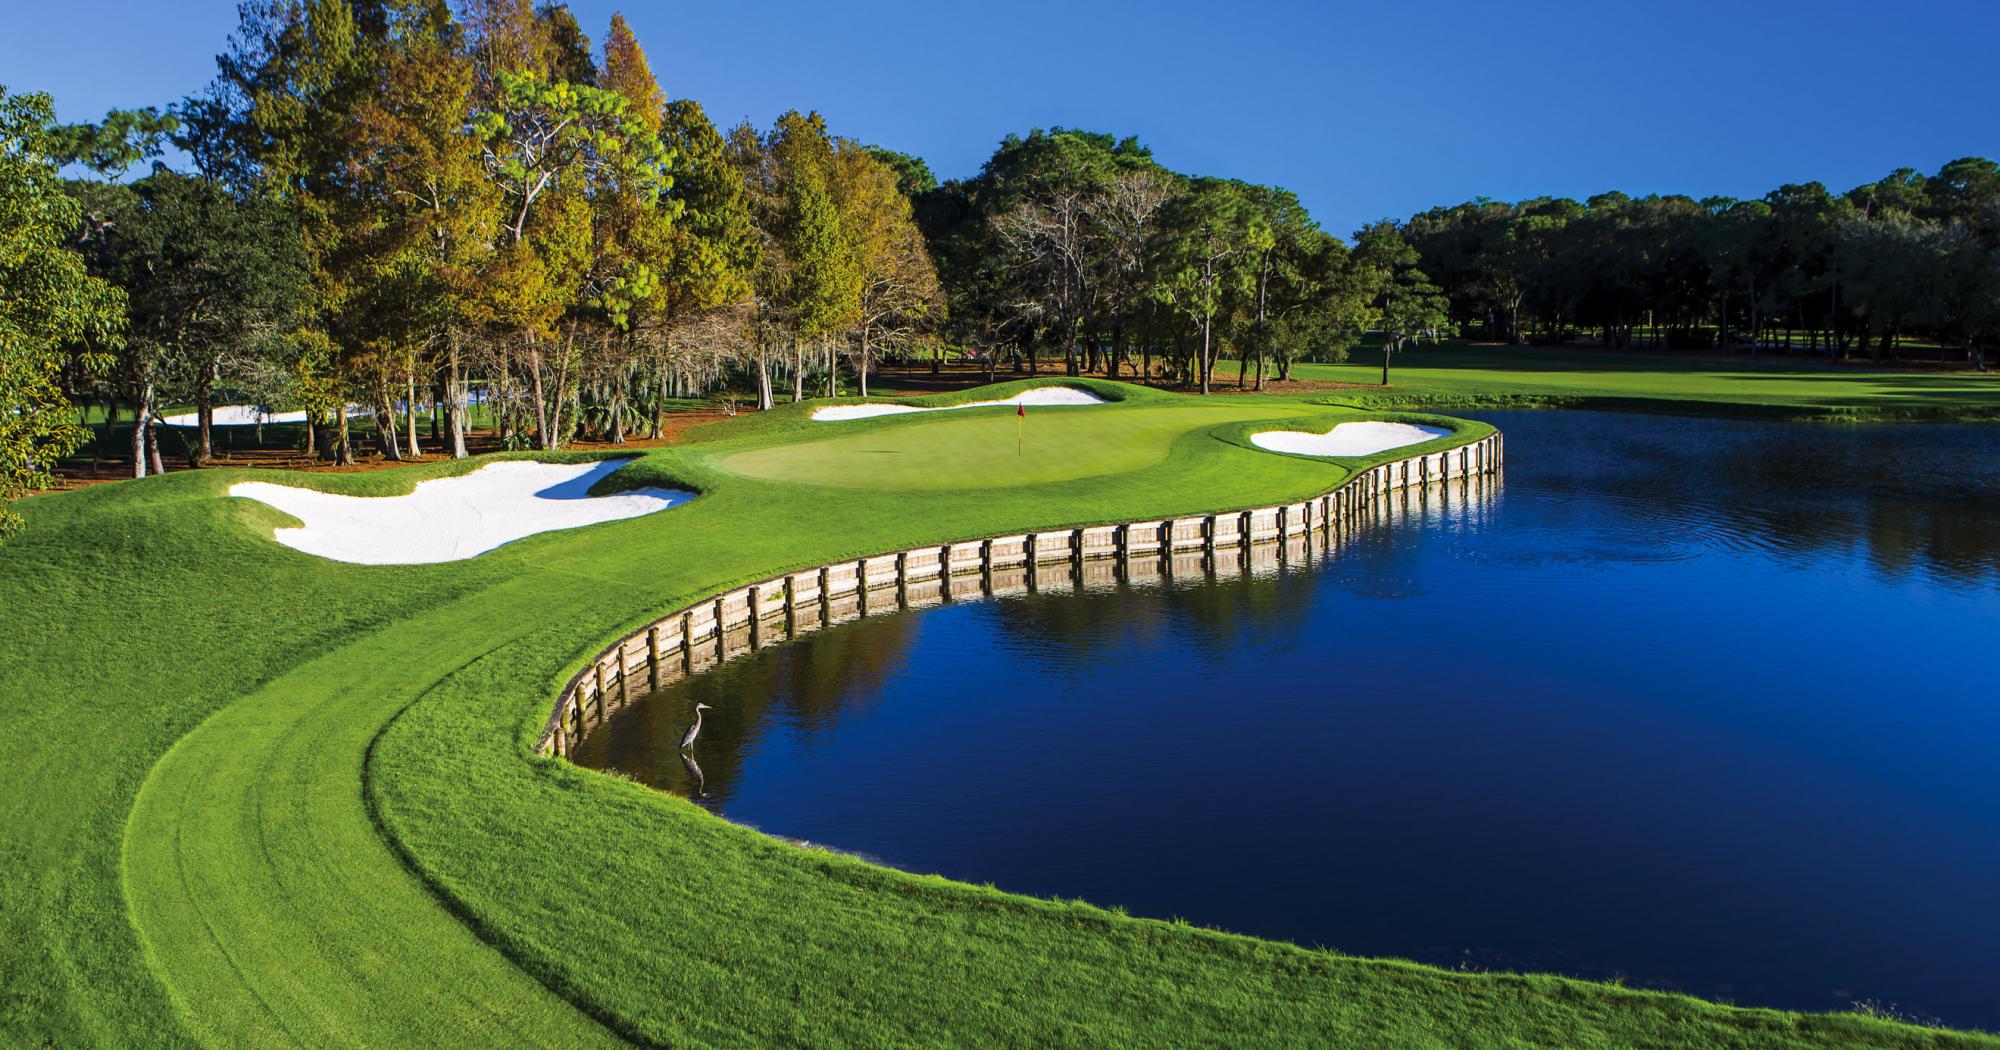 The Innisbrook Golf's picturesque golf course in stunning Florida.